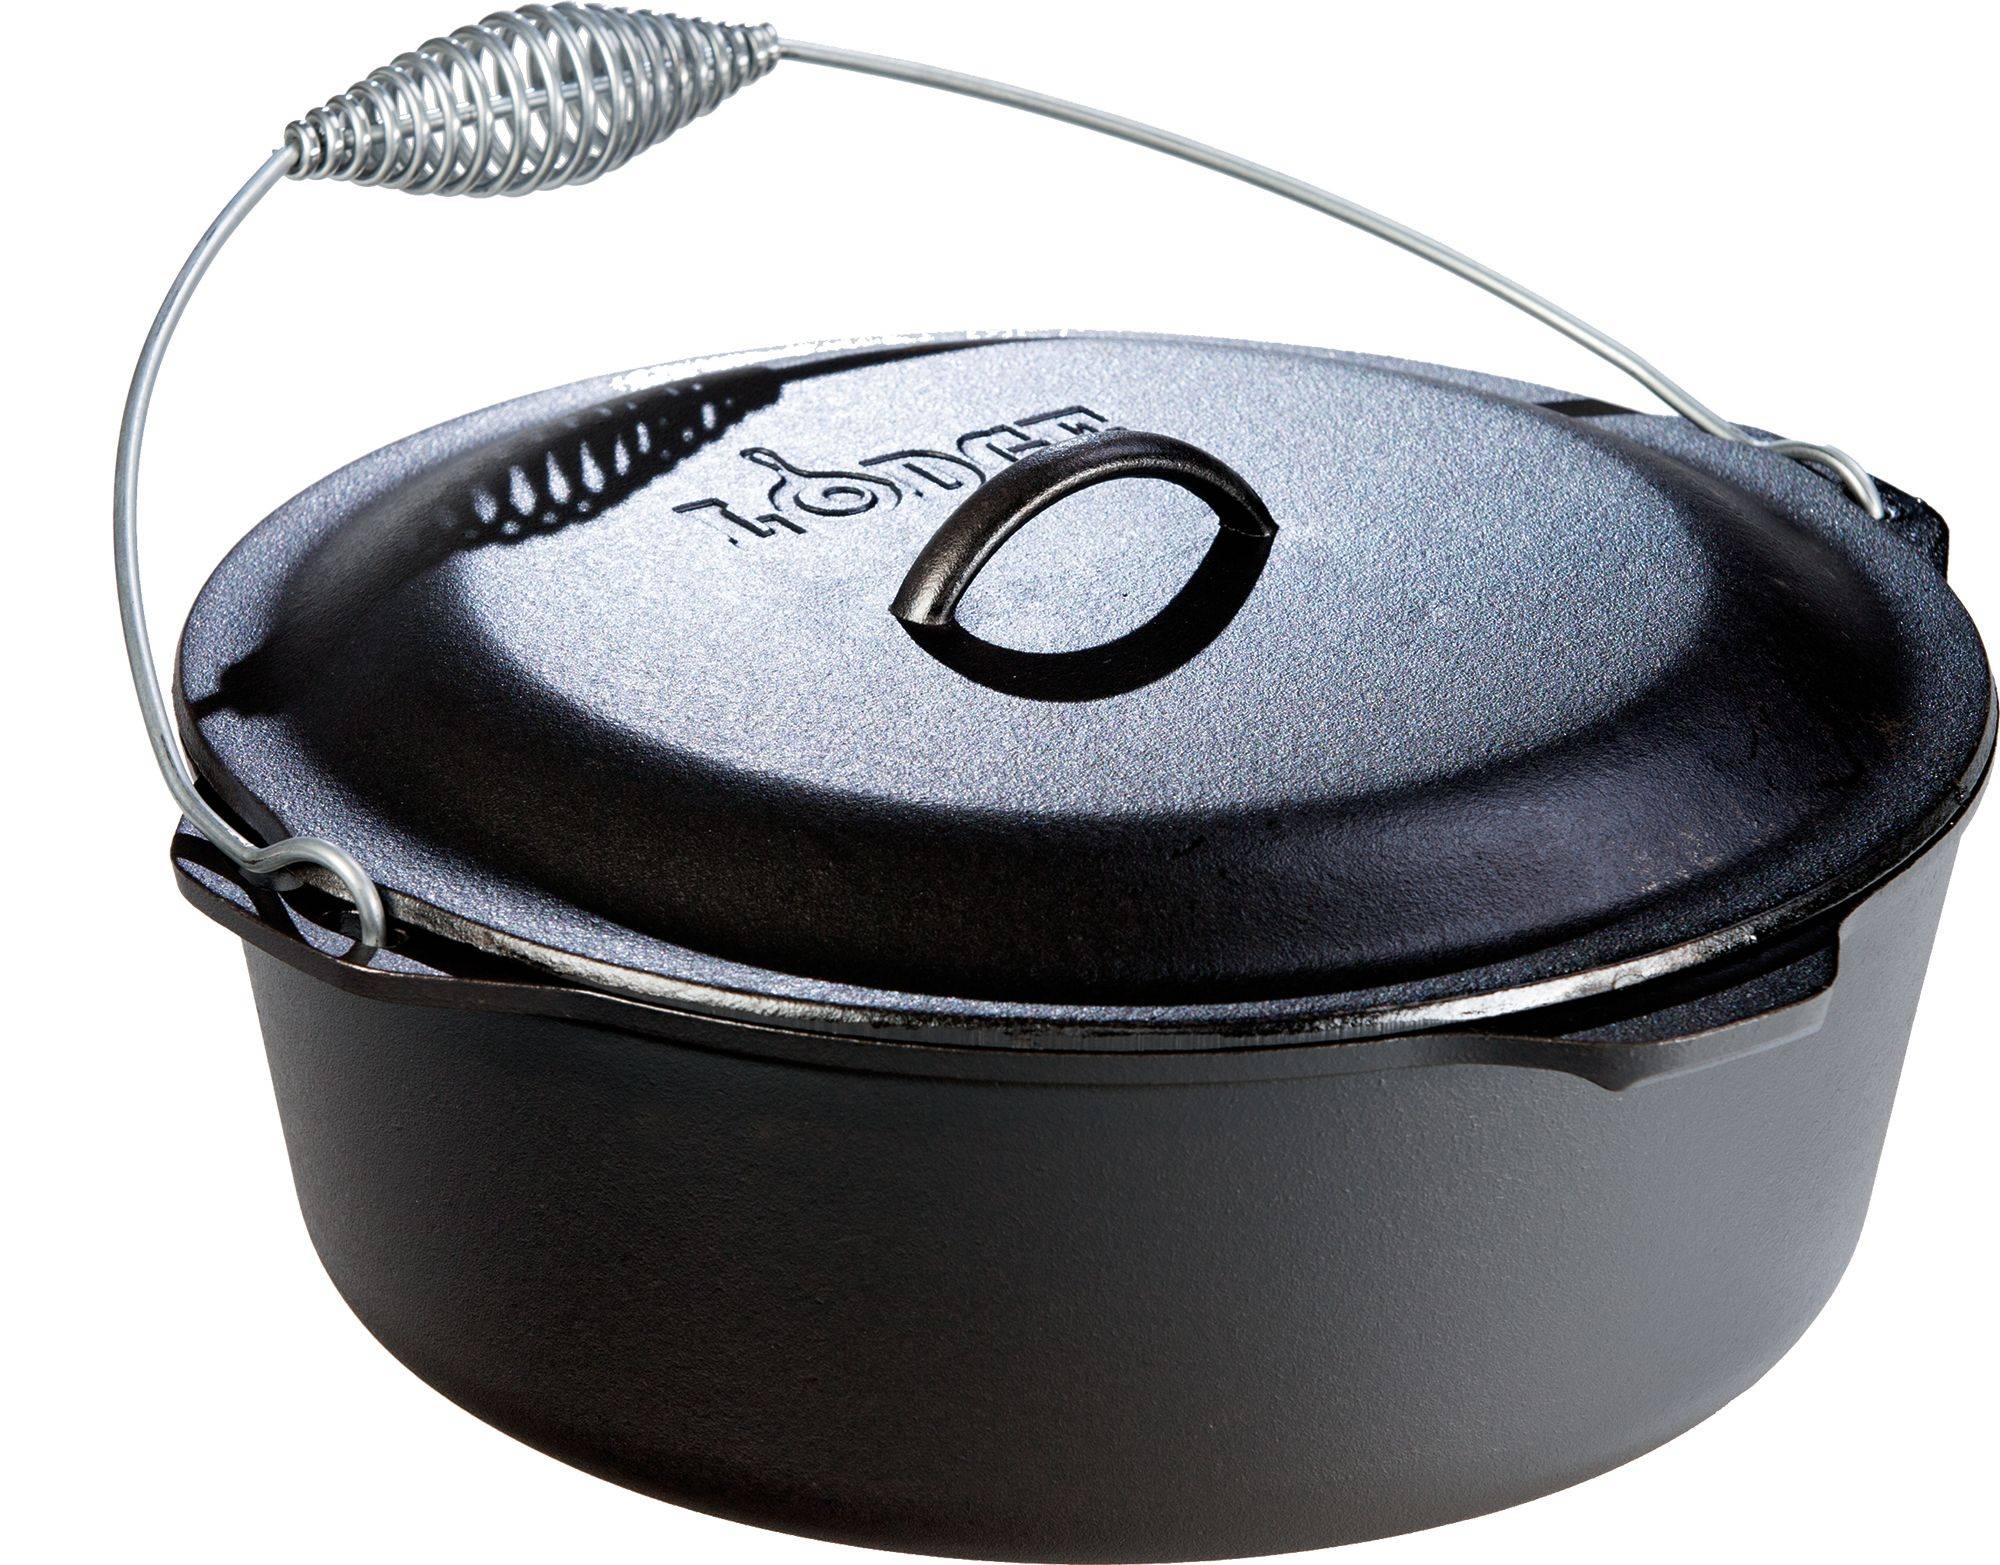 Lodge Cast Iron 9 Quart Camping Dutch Oven with Bail Handle